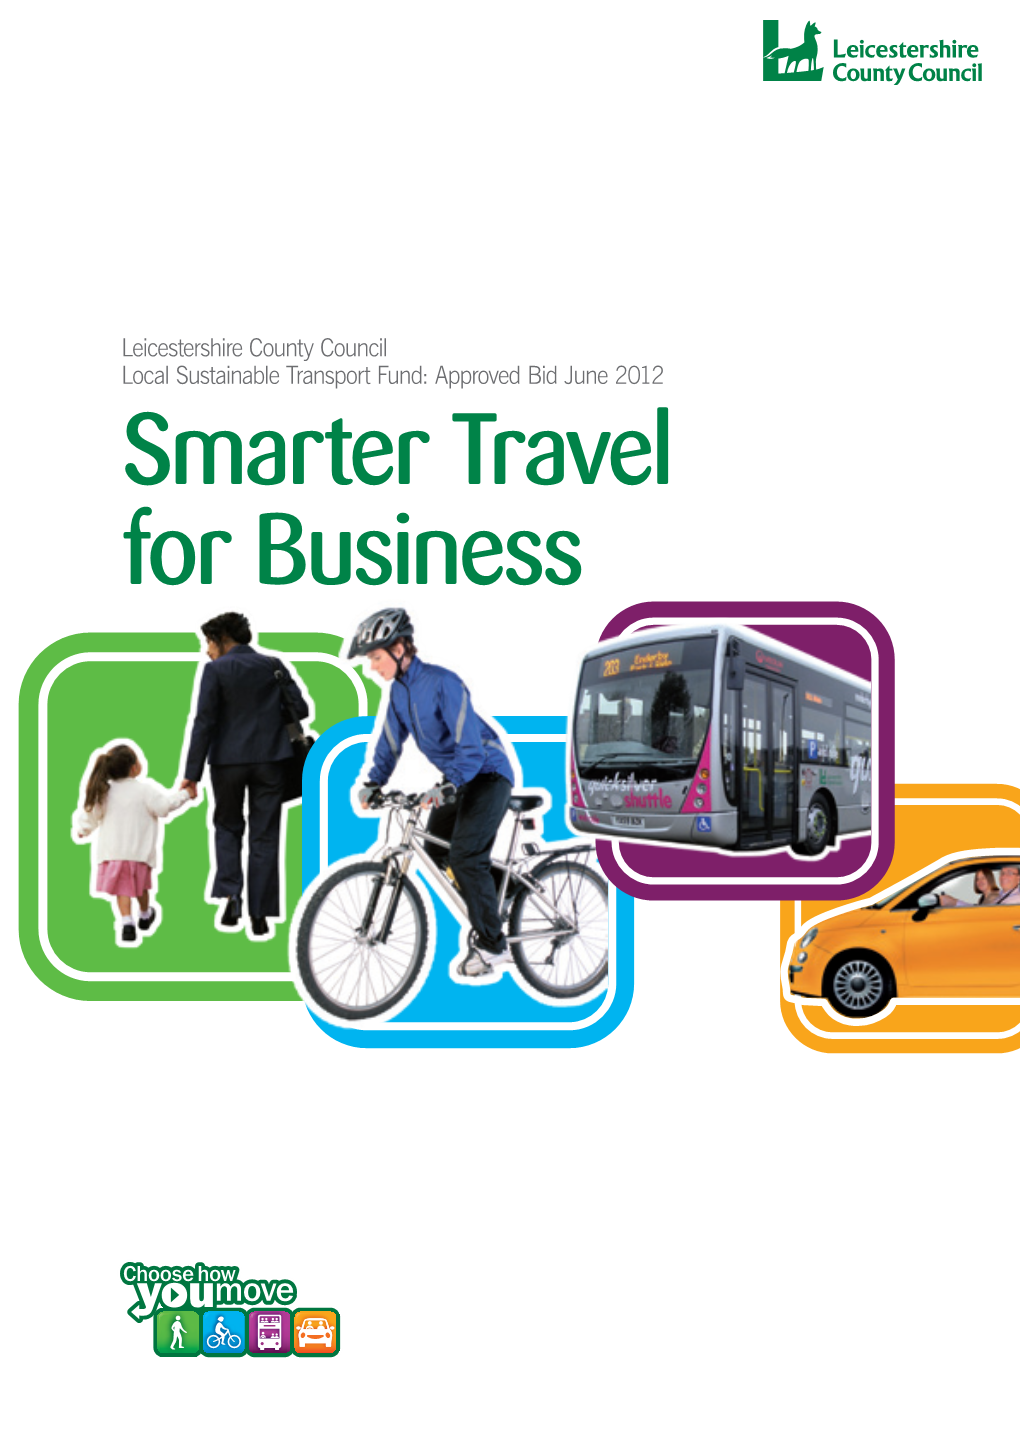 Smarter Travel for Business LIST of SUPPORTING BUSINESSES, PUBLIC and VOLUNTARY GROUPS